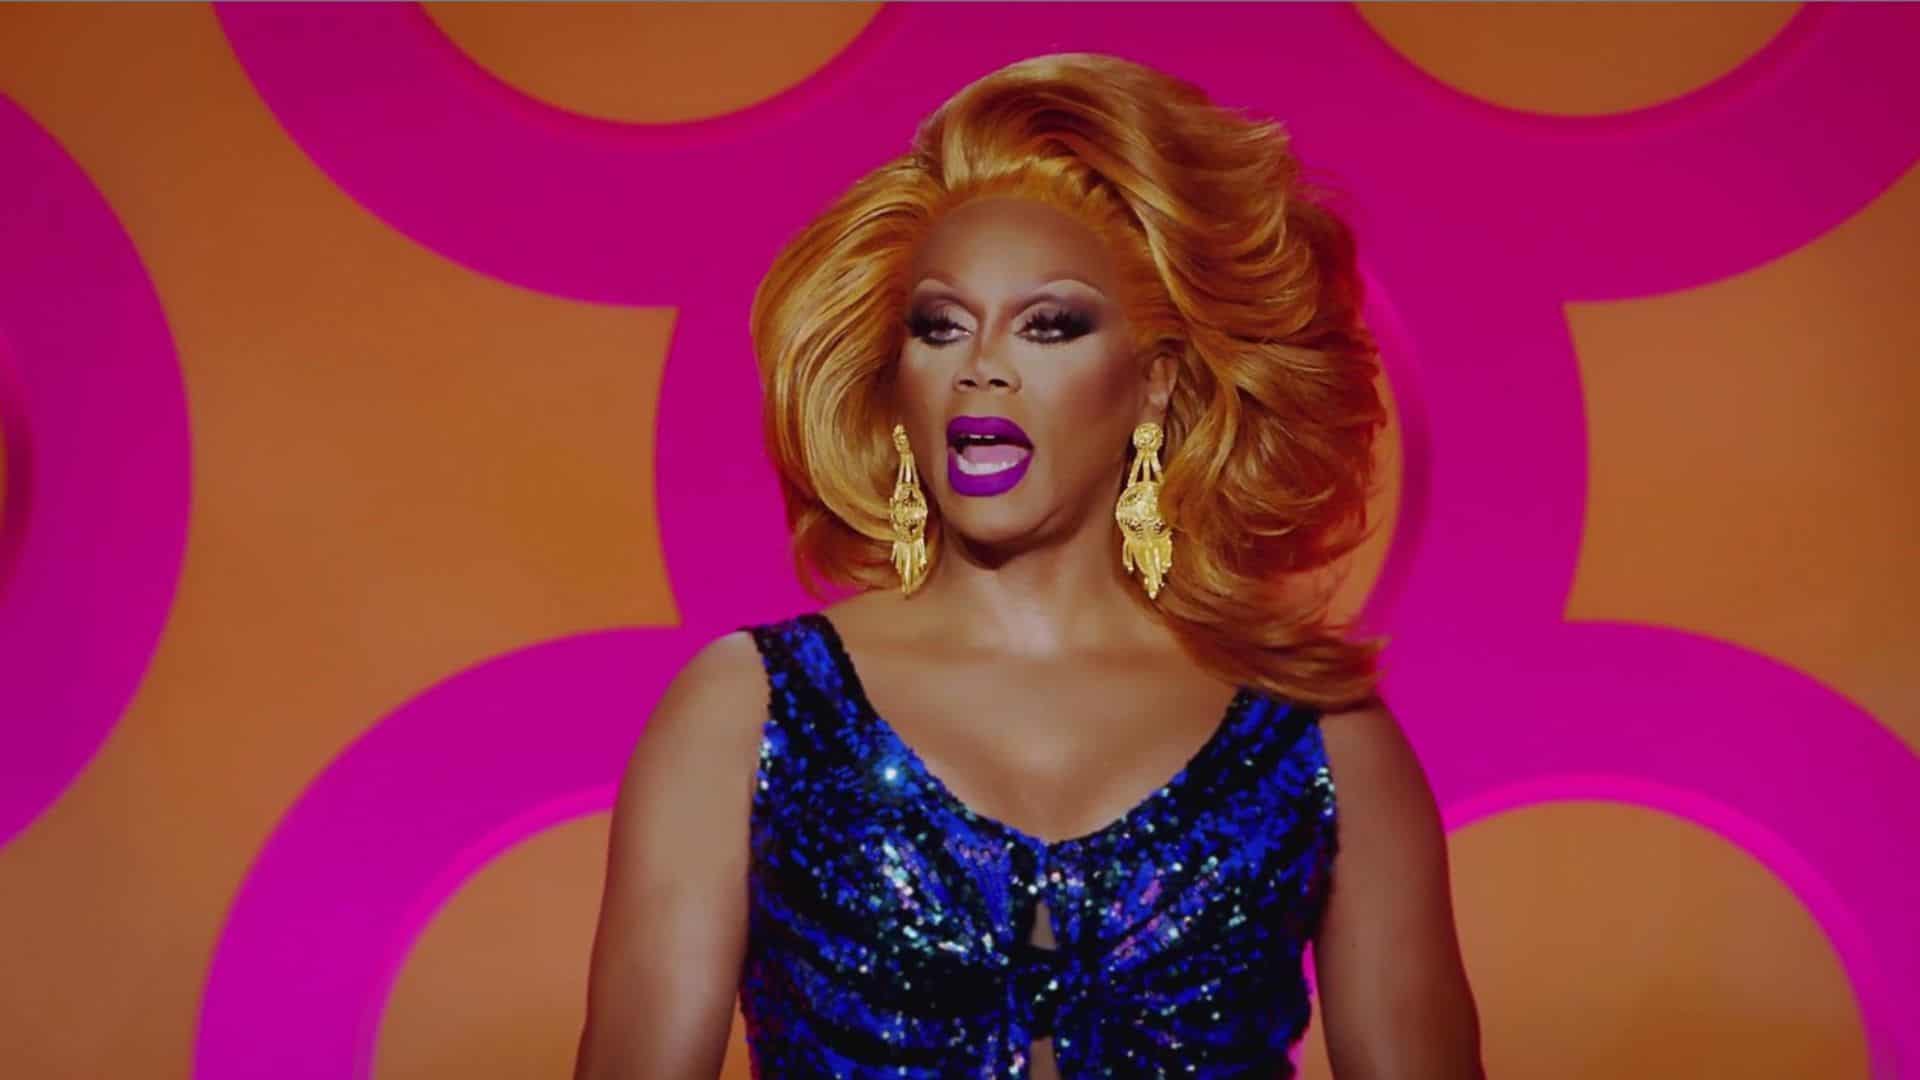 RuPaul is wearing a black and blue sequin dress in this image from World of Wonder.